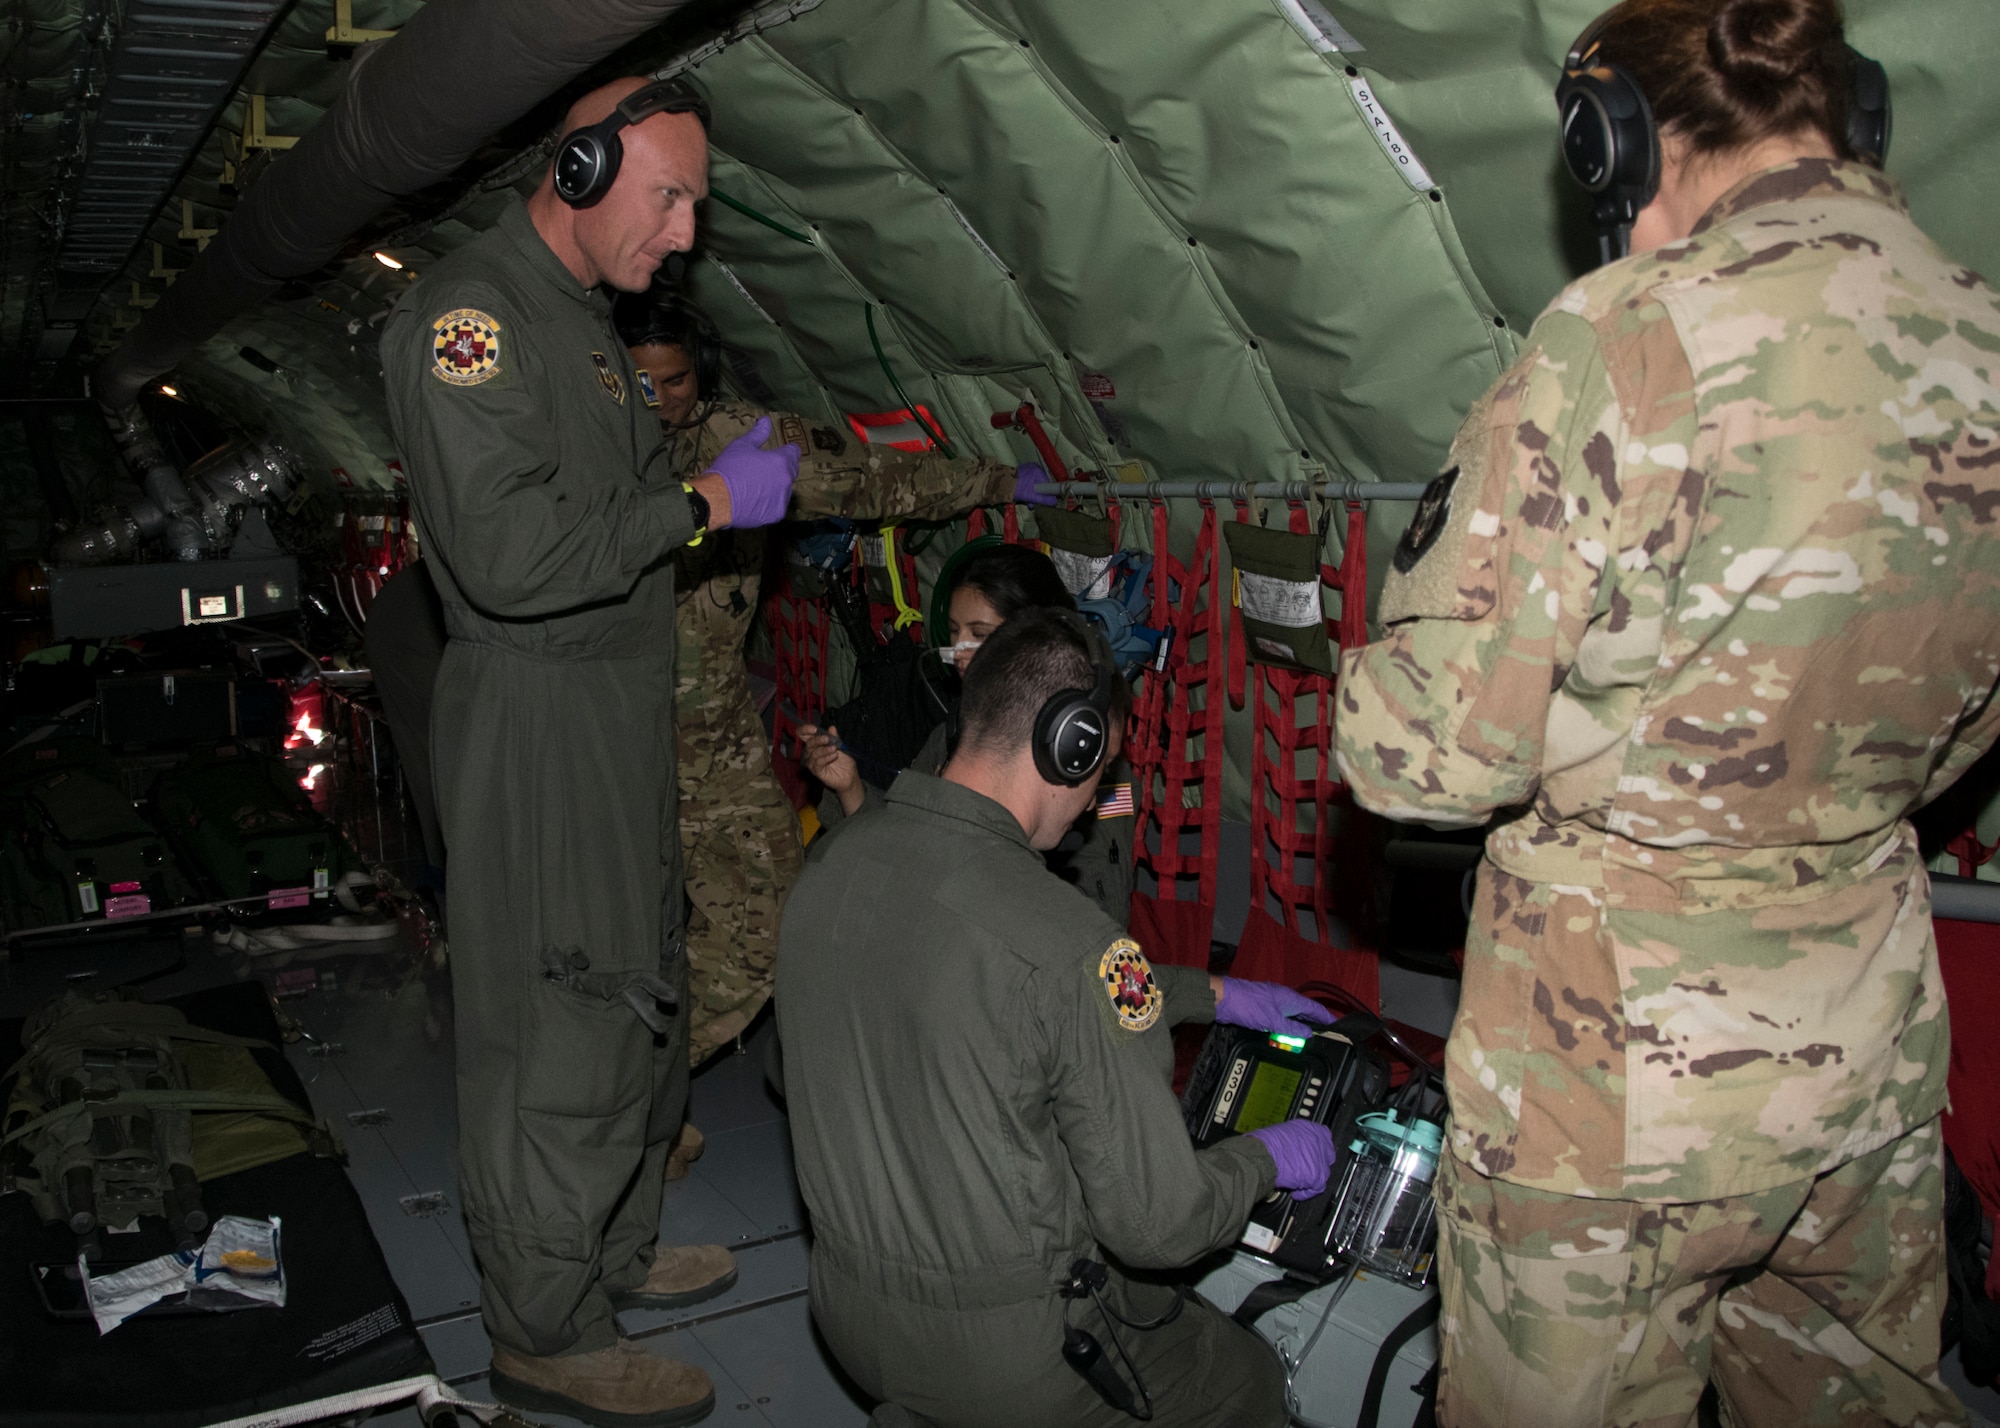 Tech Sgt. Thomas Green, 459th Aeromedical Evacuation Squadron flight medic, helps his crew set up a nasal gastric tube suction as part of an off station trainer on a KC-135 Stratotanker, Sept. 20, 2019. The AES team conducted training during a flight to Wright Patterson, Ohio, where they later participated in the Air Force Marathon. (U.S. Air Force photo by Staff Sgt. Cierra Presentado/Released)